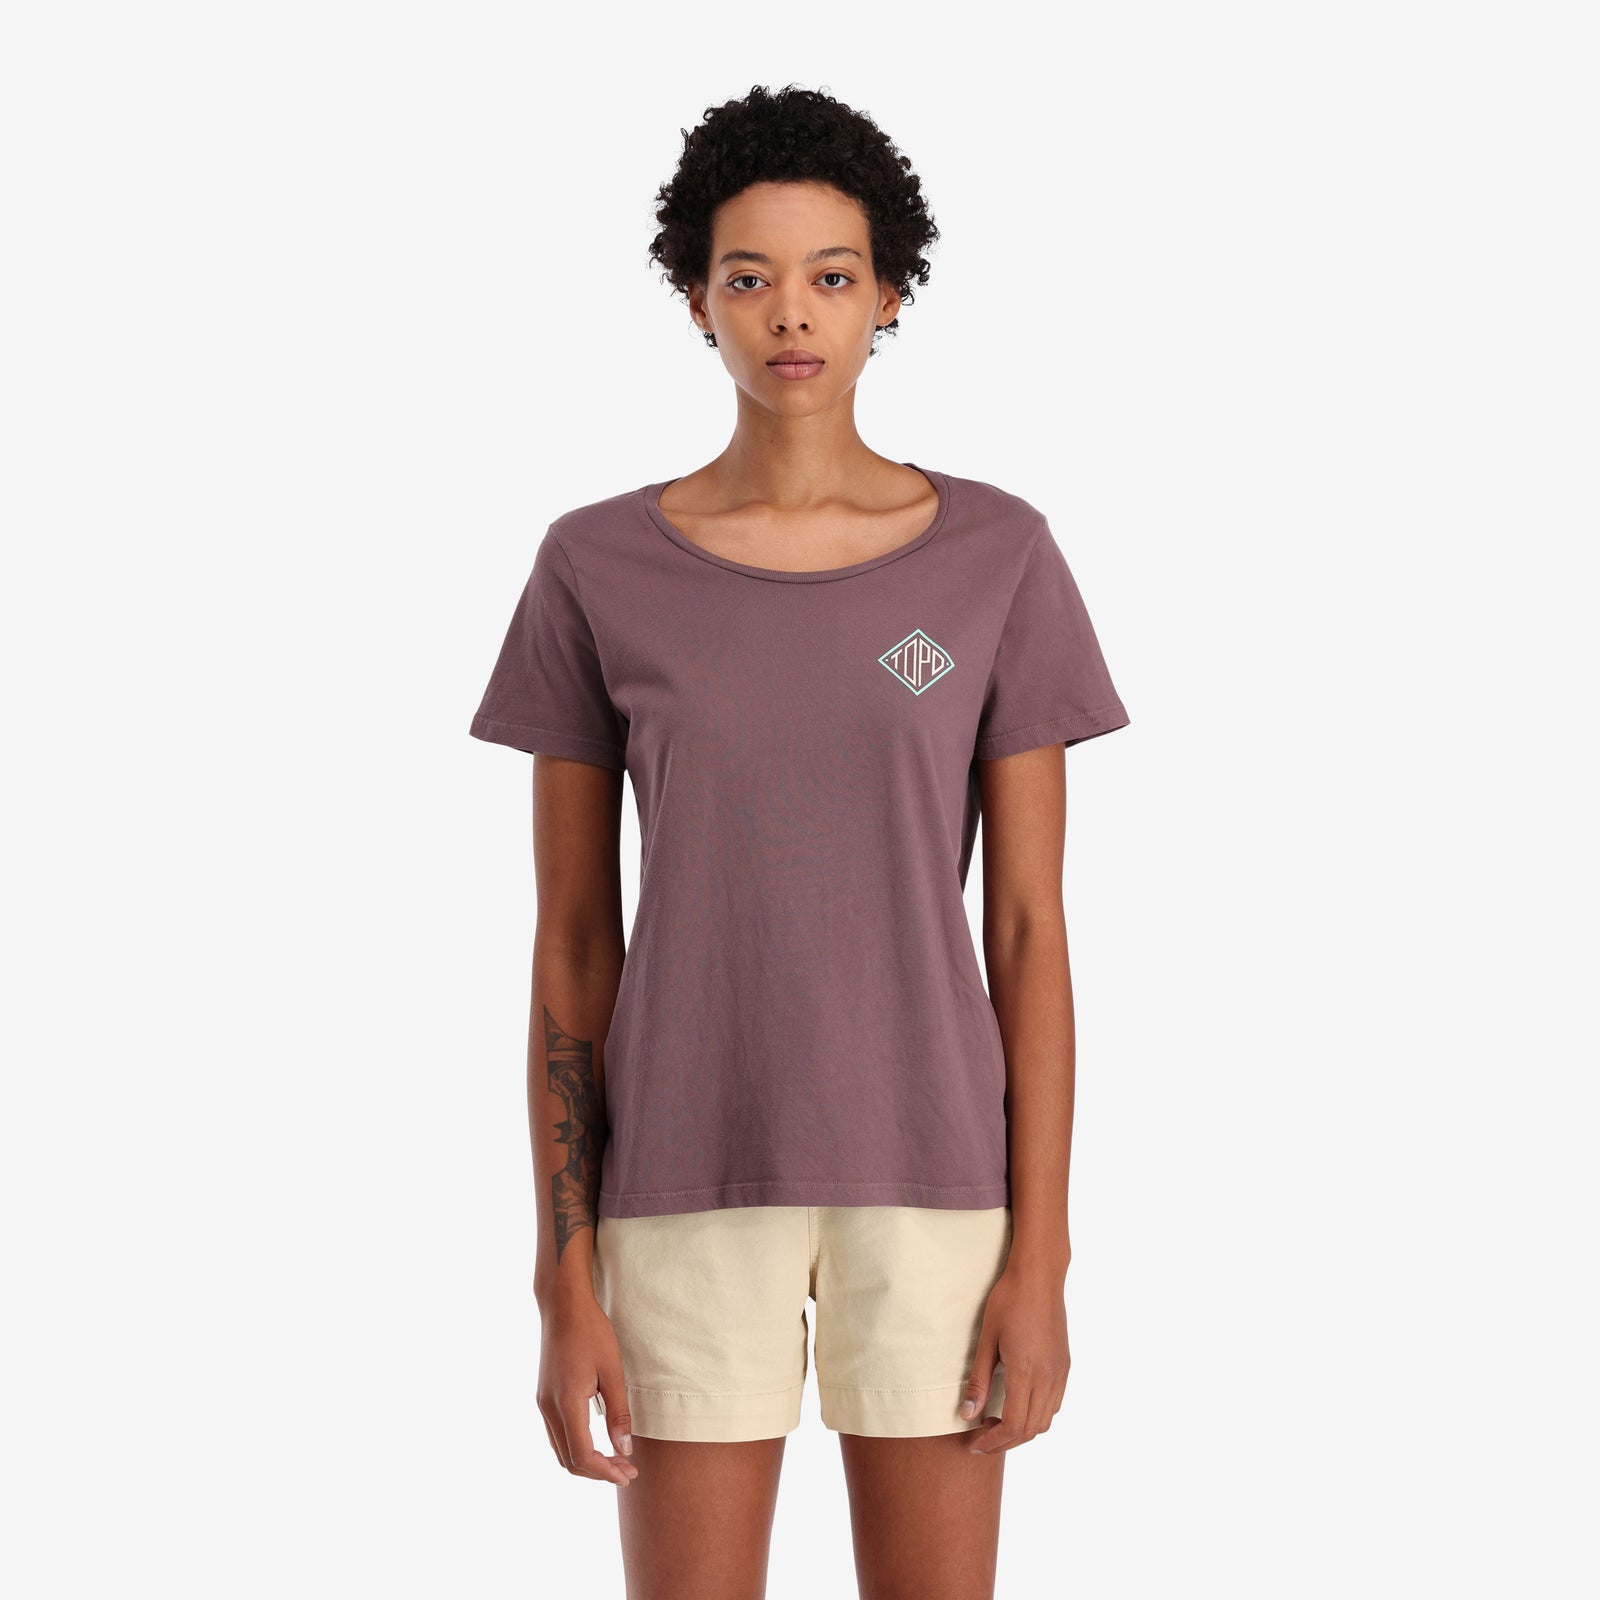 On model front view of Topo Designs Women's Small Diamond Tee 100% organic cotton short sleeve graphic logo t-shirt in "peppercorn" purple brown.